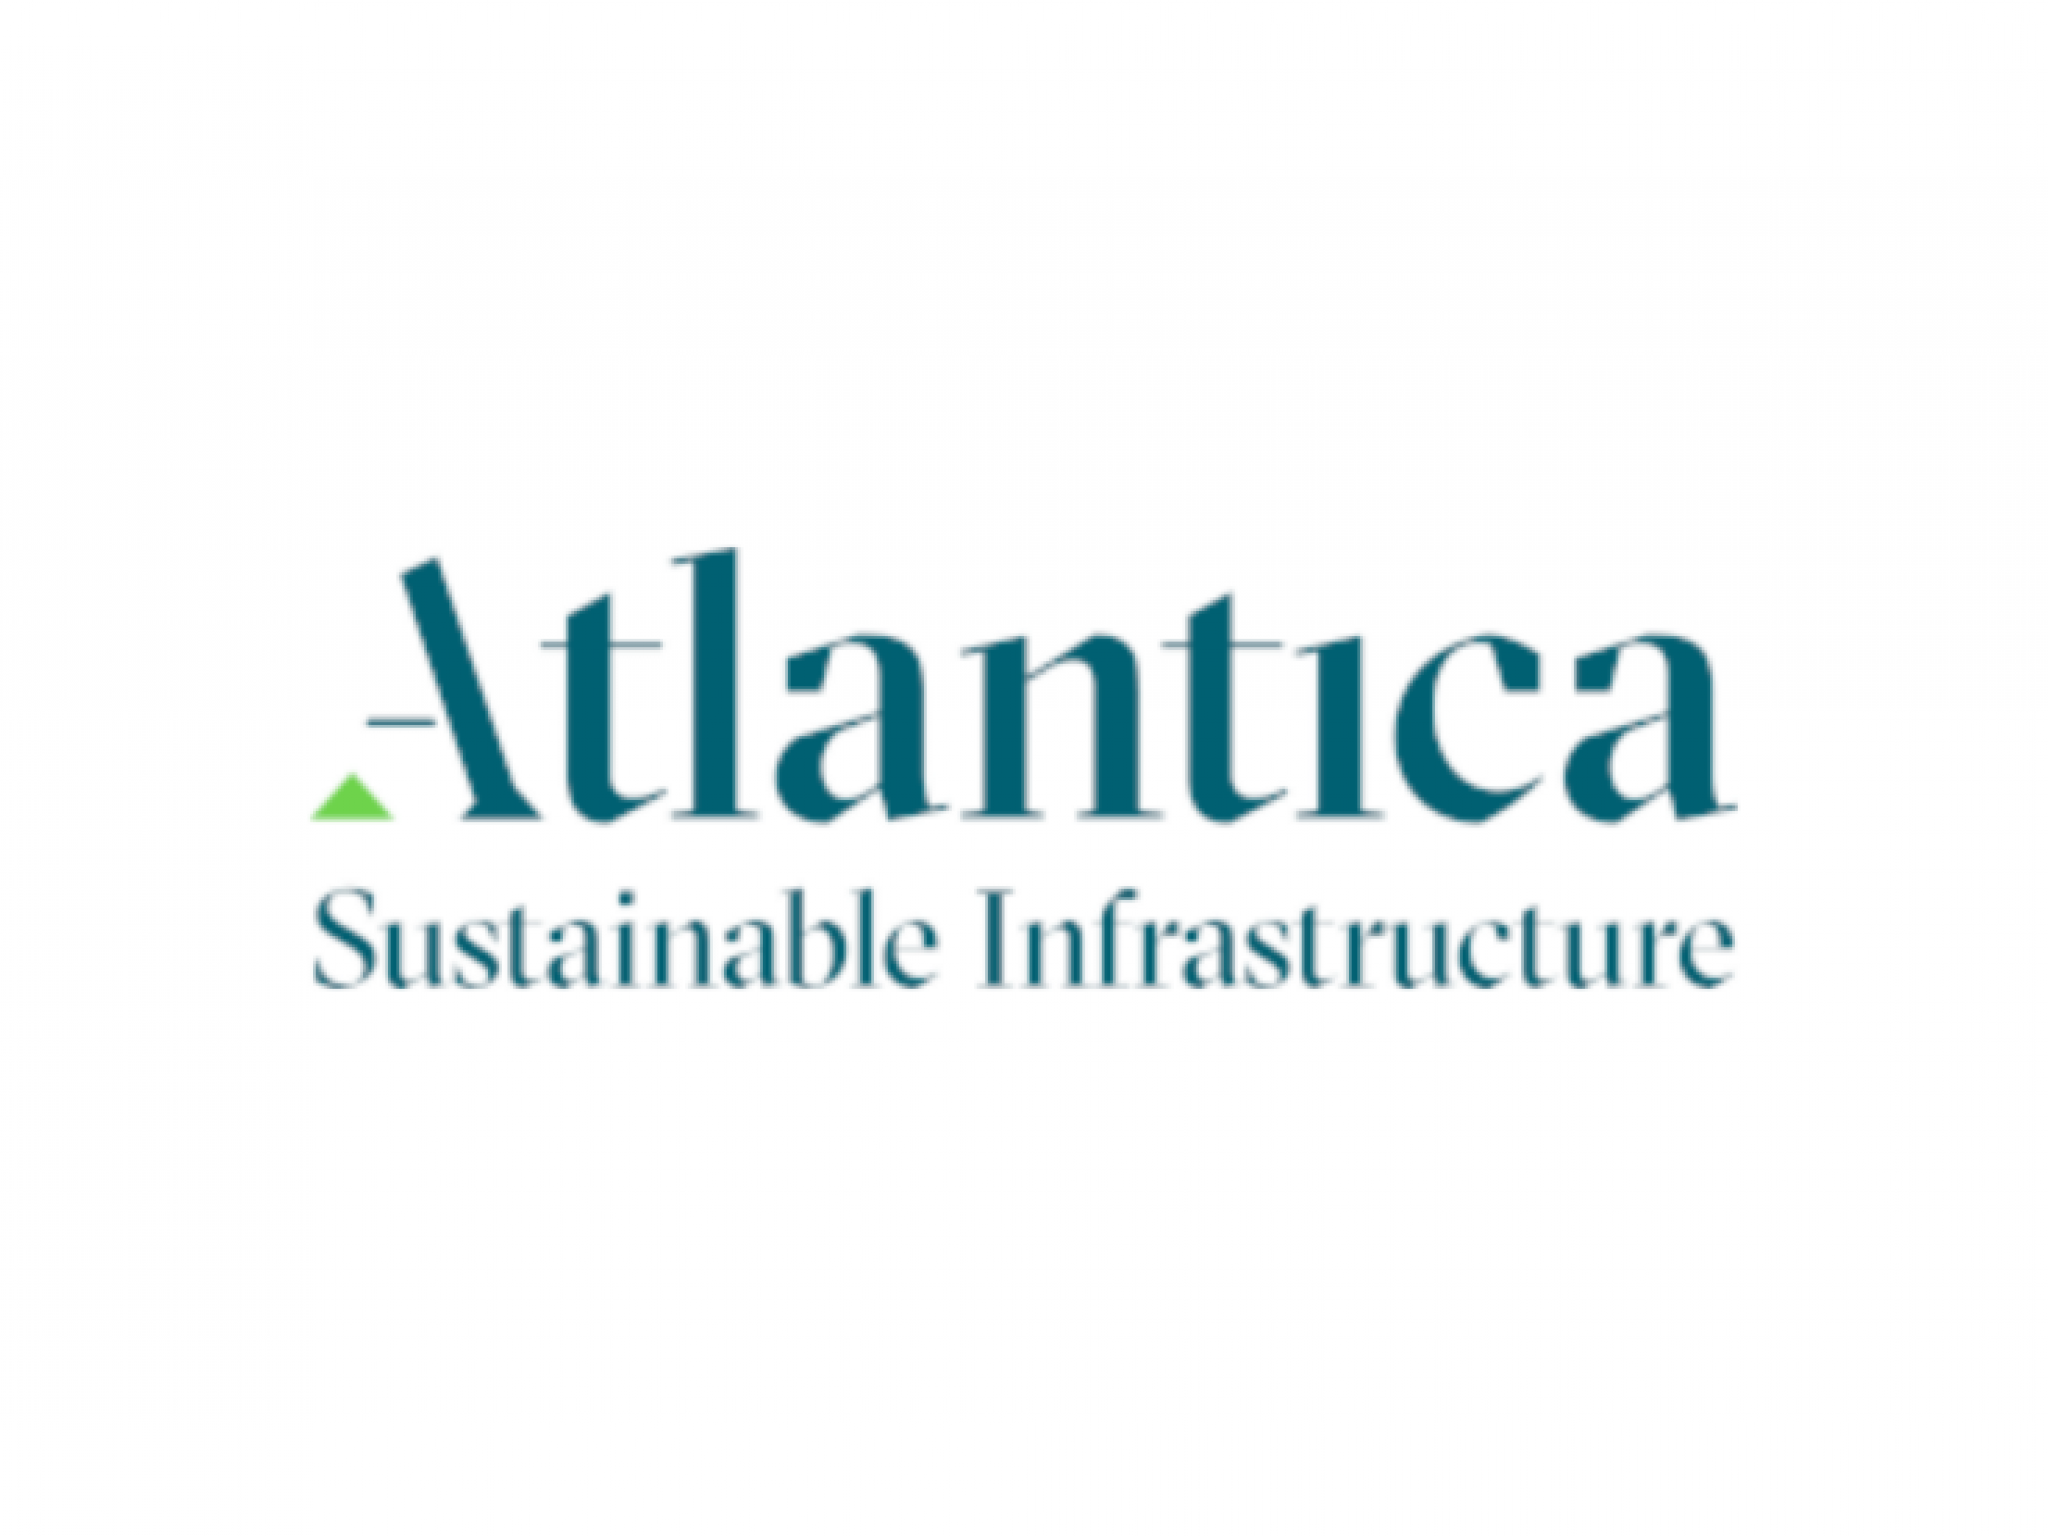  atlantica-sustainable-infrastructure-clocks-mixed-q4-results-sets-optimistic-fy24-ebitda-and-cash-goals 